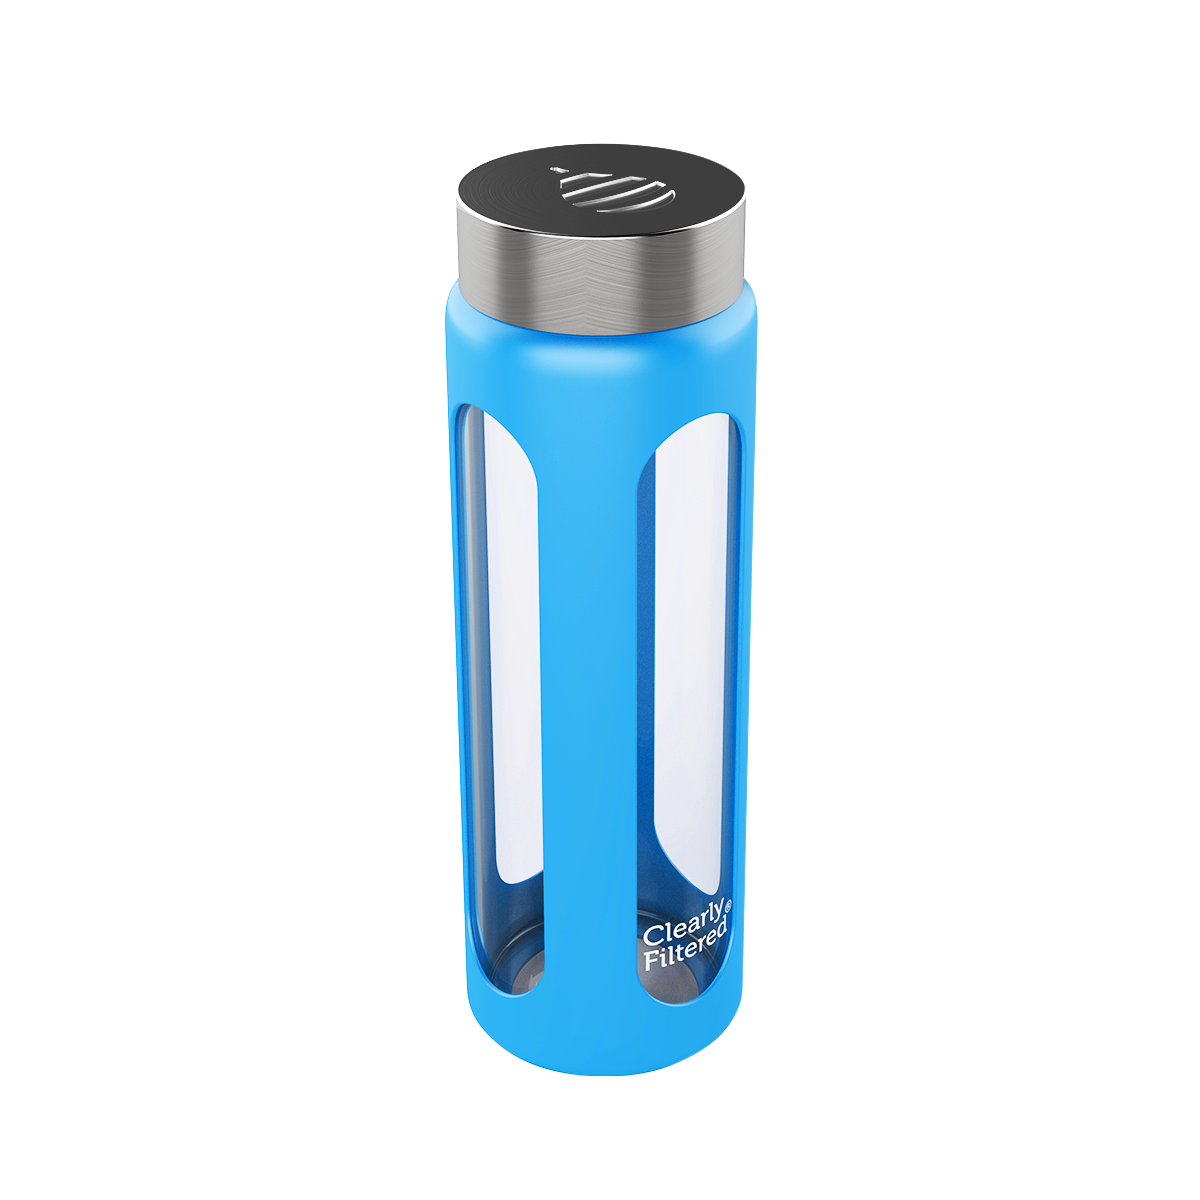 https://cdn.shopify.com/s/files/1/1011/0318/files/GlassWaterBottle_20oz_2.png?v=1694714849&width=3840&quality=75